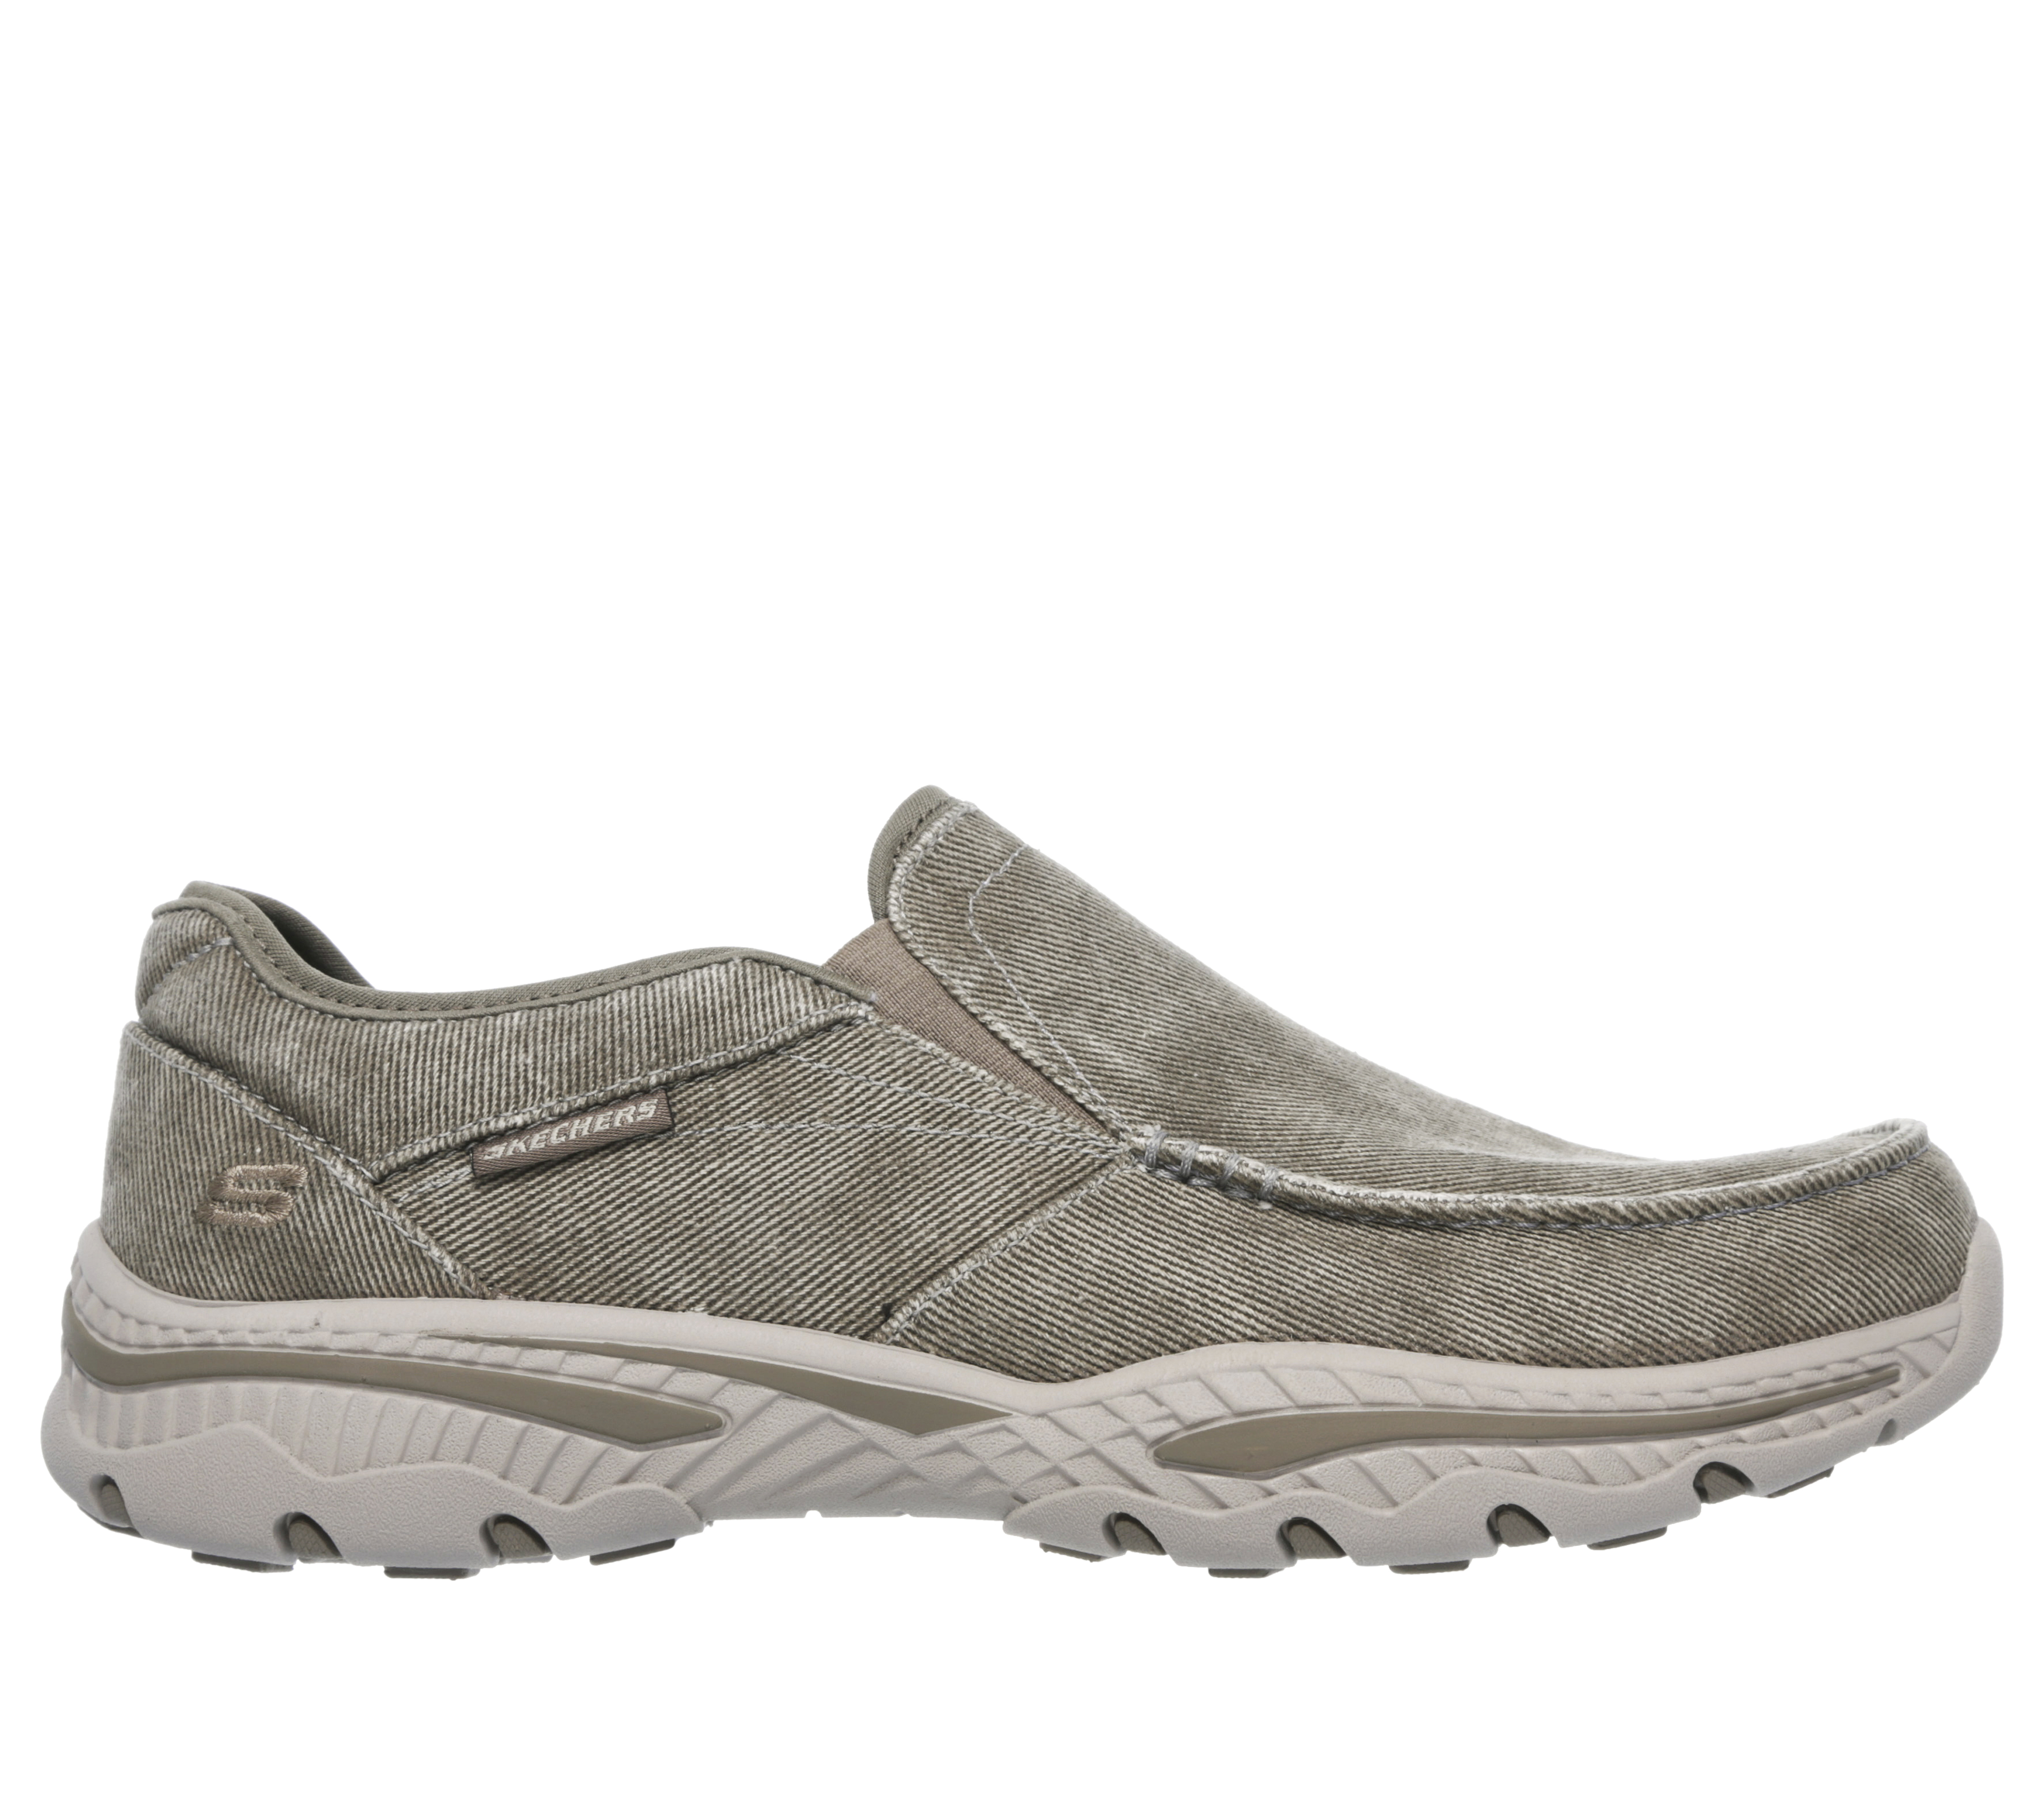 What Are Skechers Relaxed Fit?